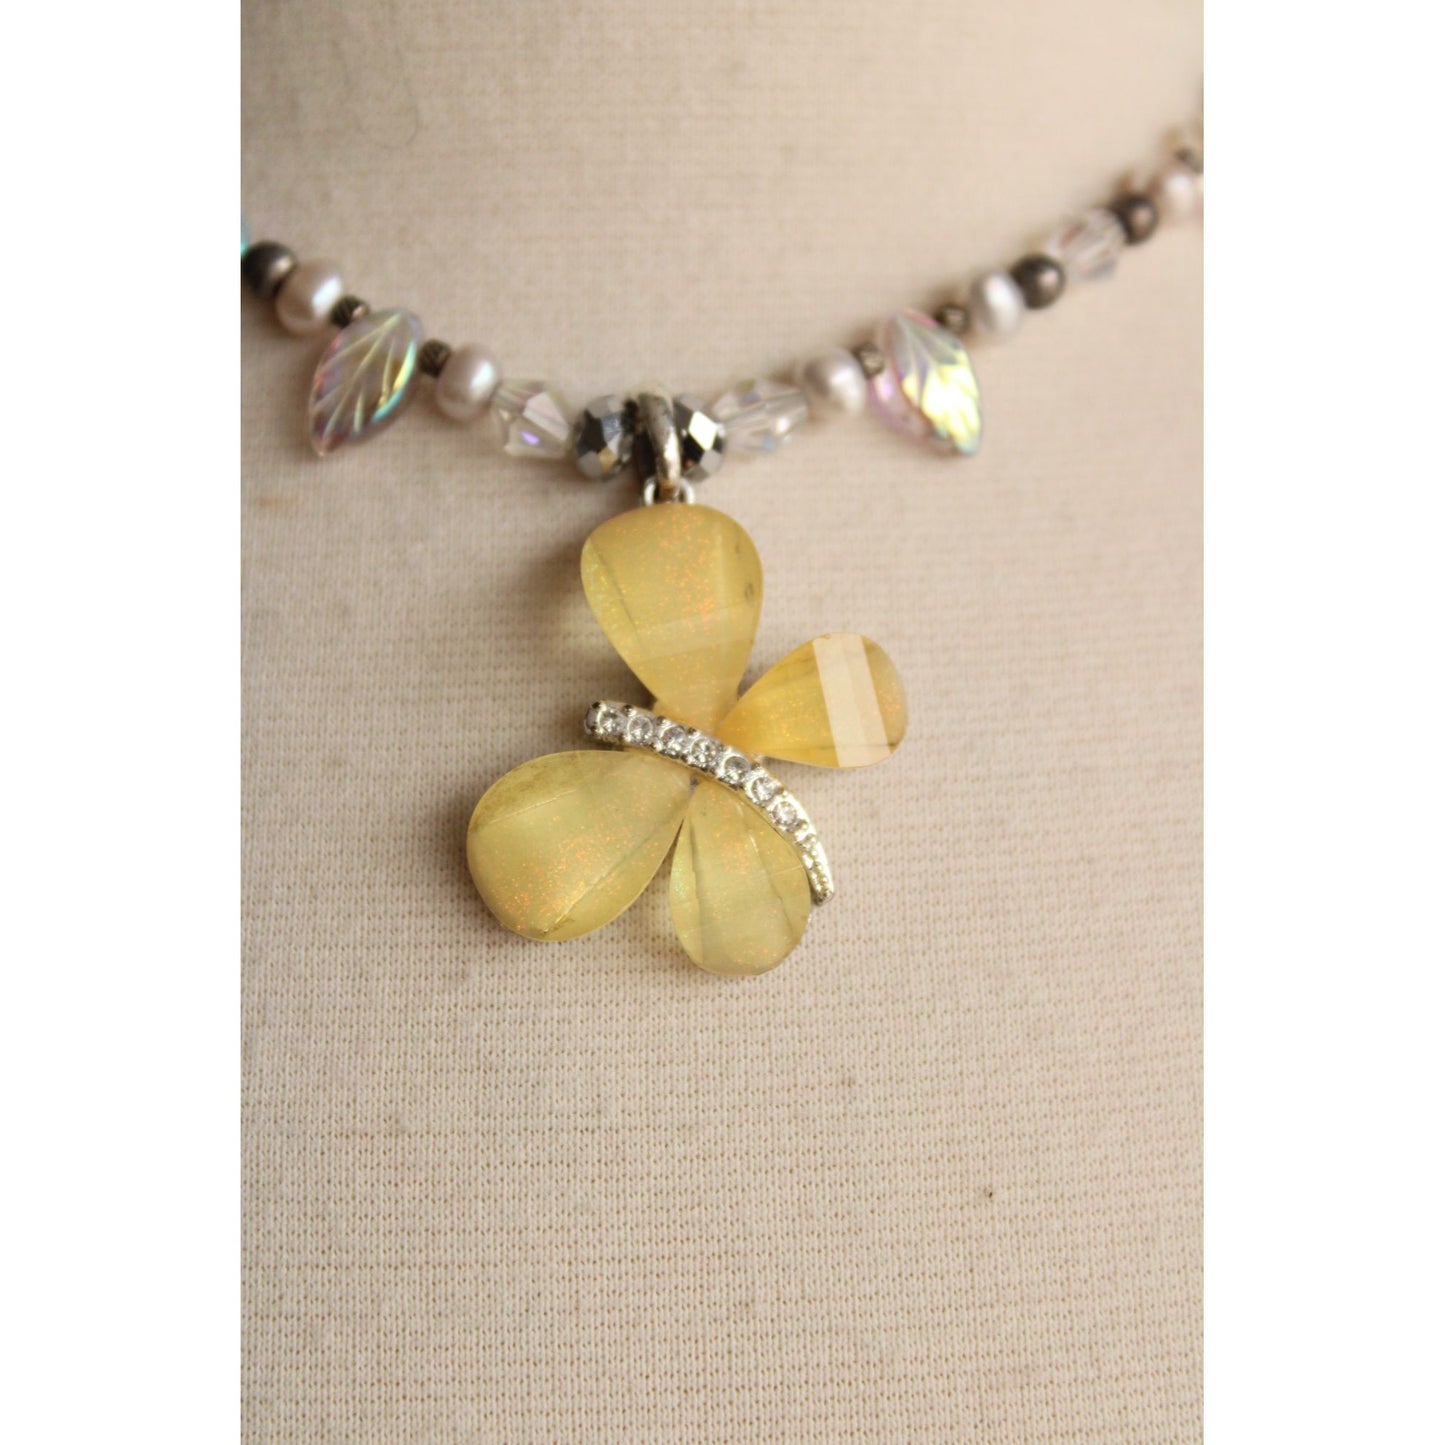 Butterfly Beaded Necklace, Toggle Clasp, Handmade